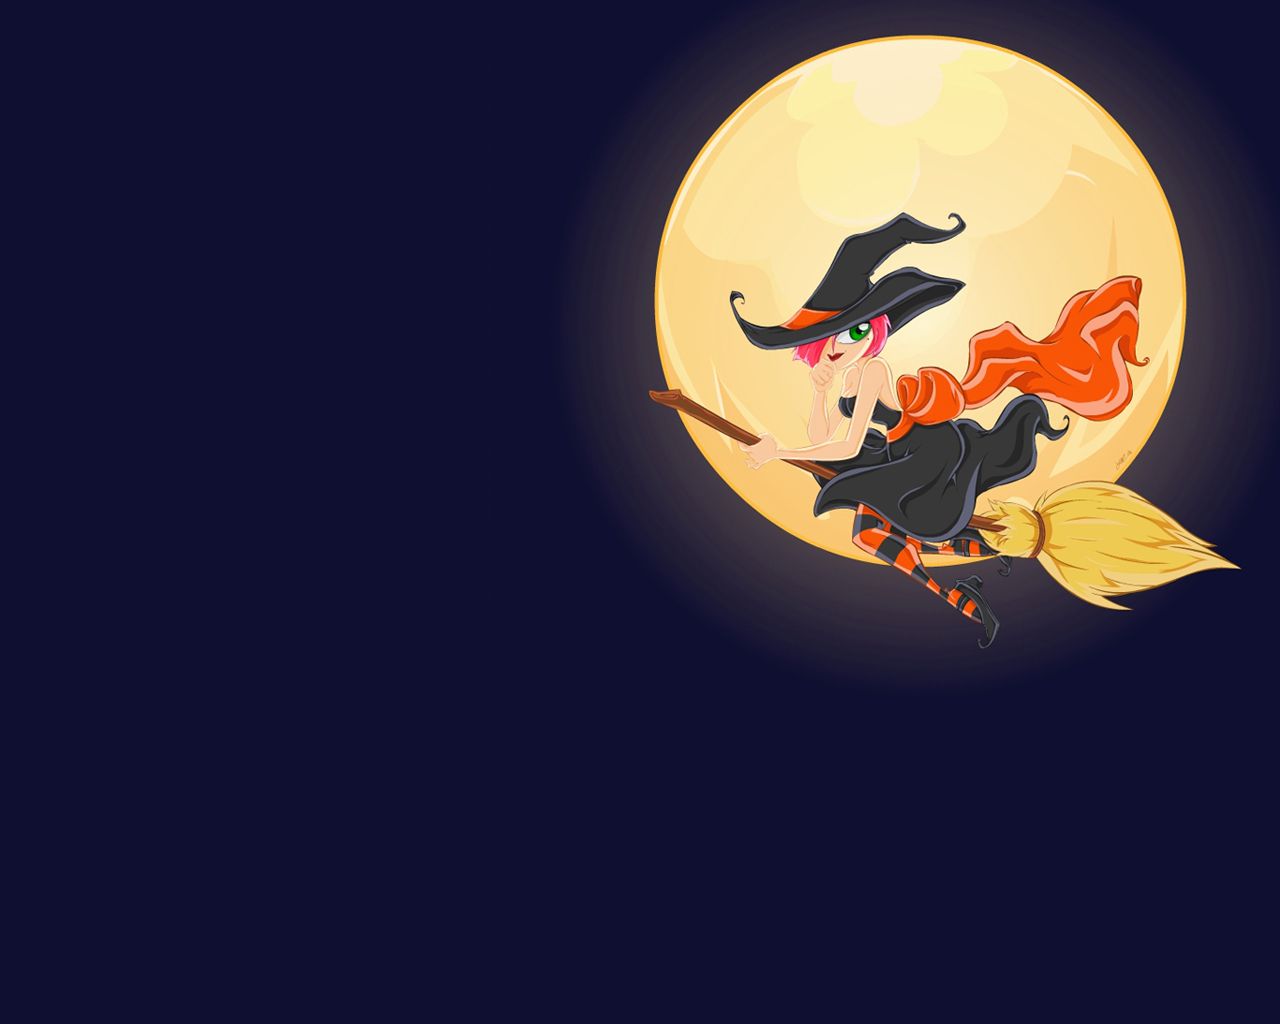 Scary Halloween 2012 HD Wallpapers Pumpkins, Witches, Spider Web